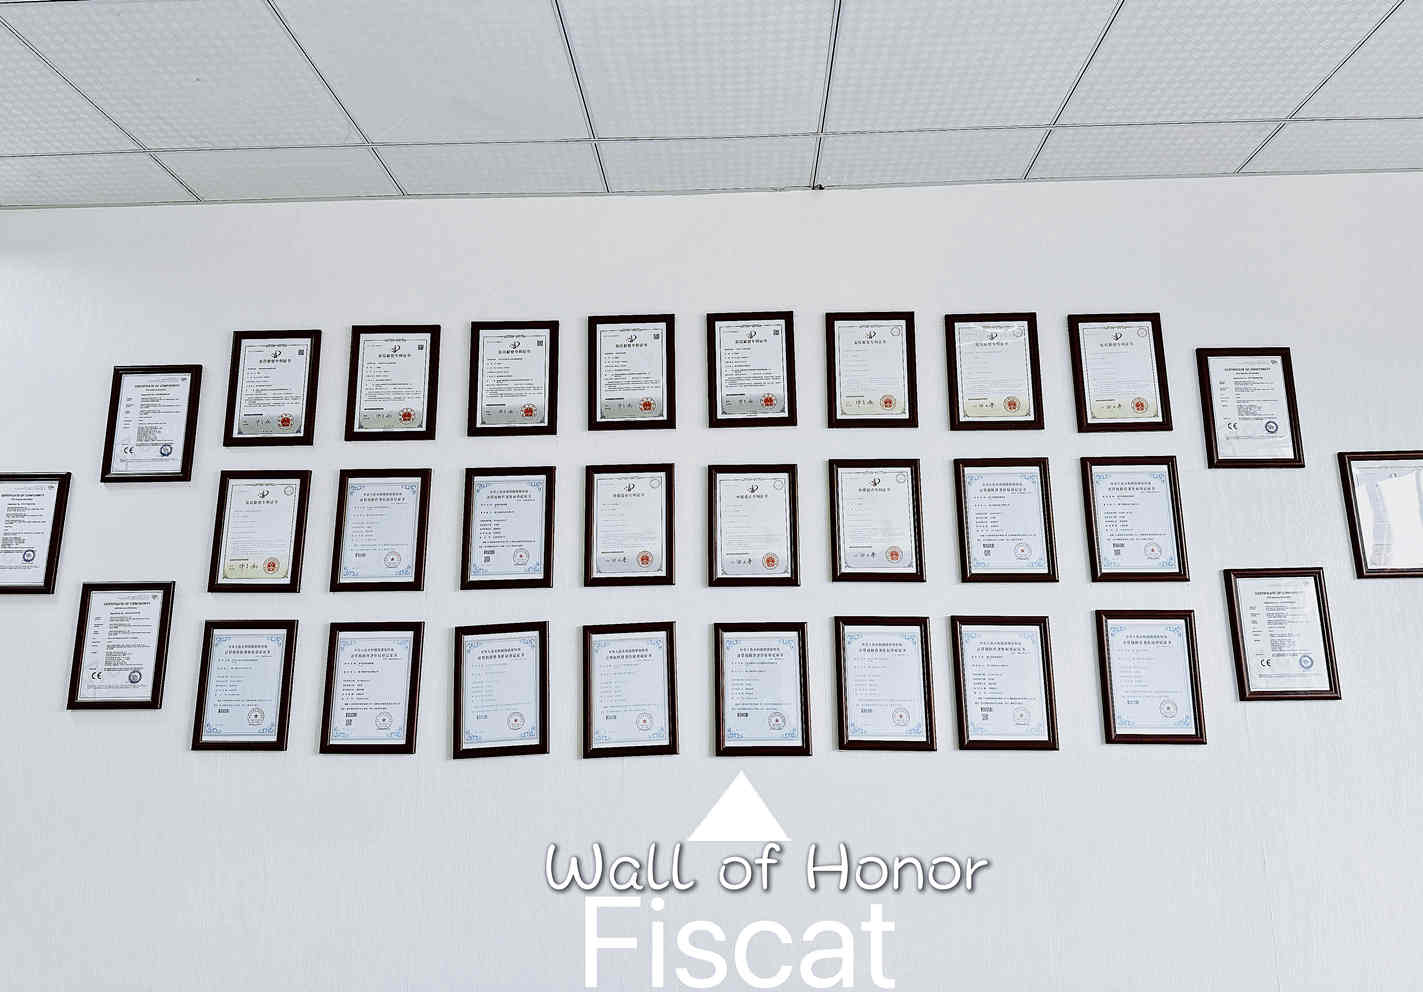 Fiscat's Wall of Honor.jpg